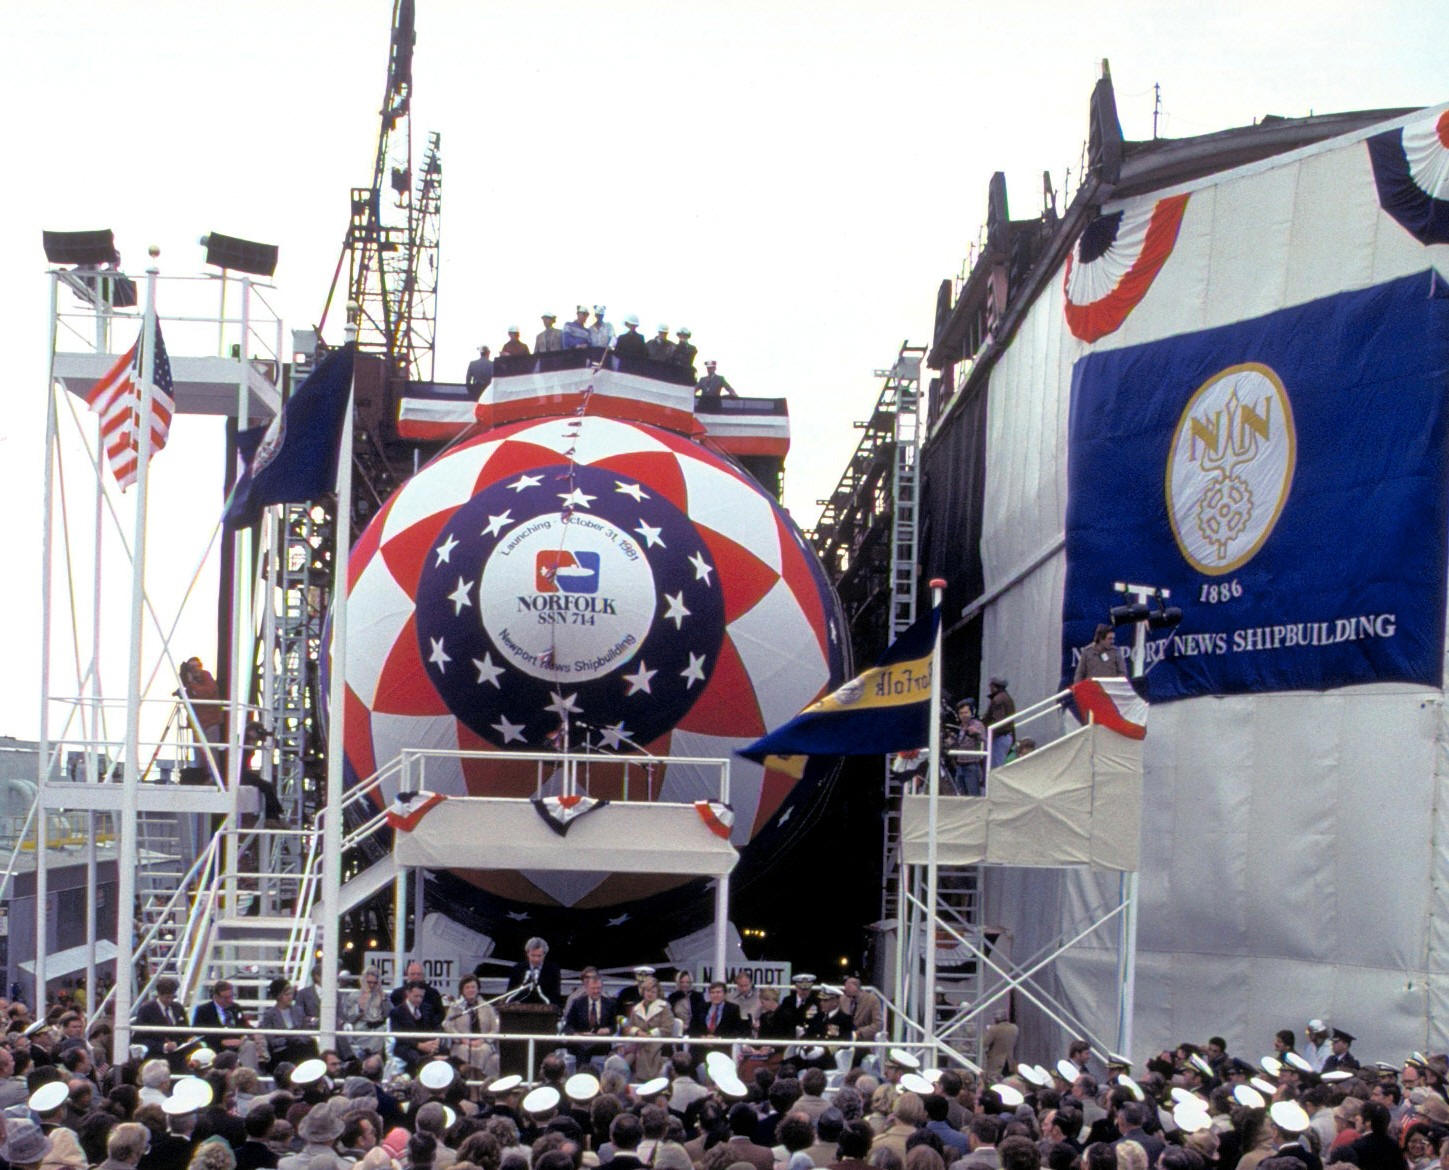 ssn-714 uss norfolk launching ceremony october 1981